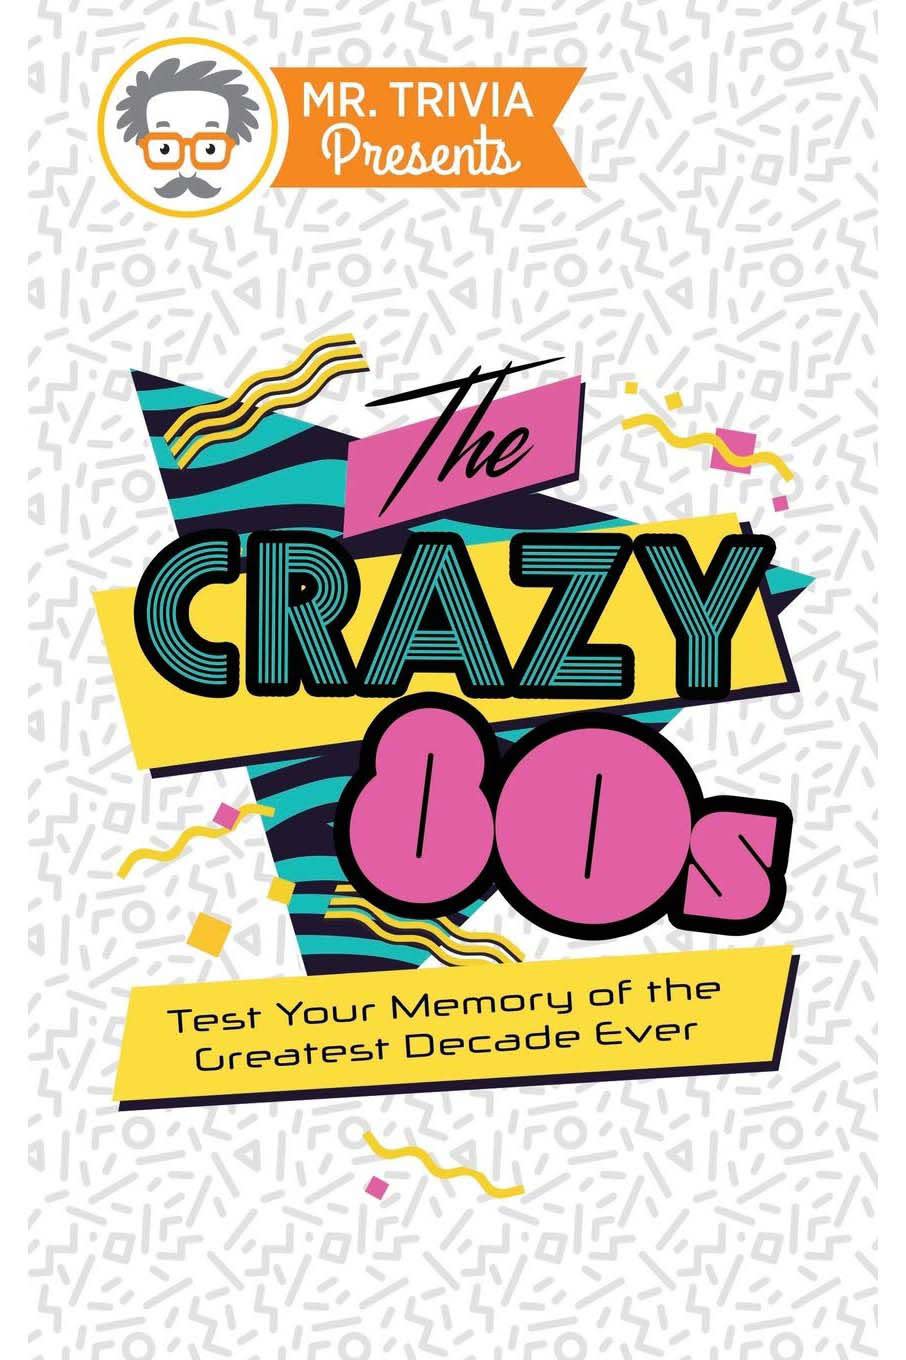 'The Crazy 80s: Test Your Memory of the Greatest Decade Ever'